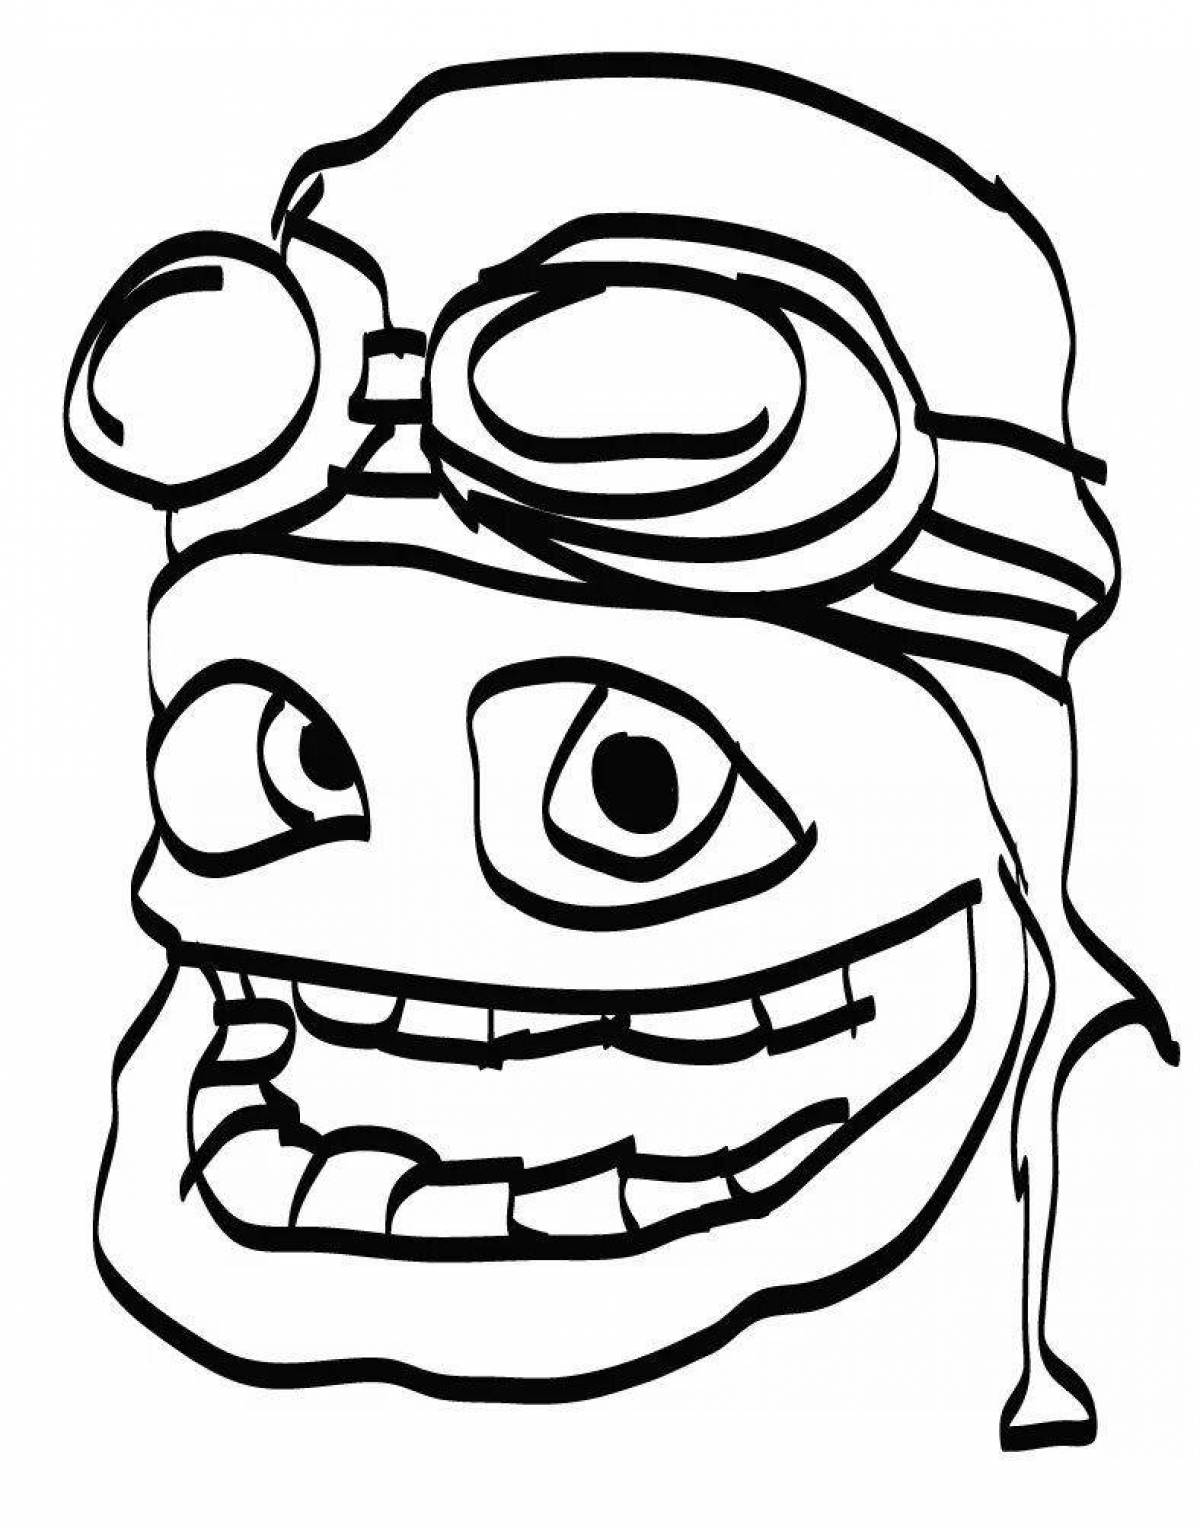 Live crazy frog coloring book